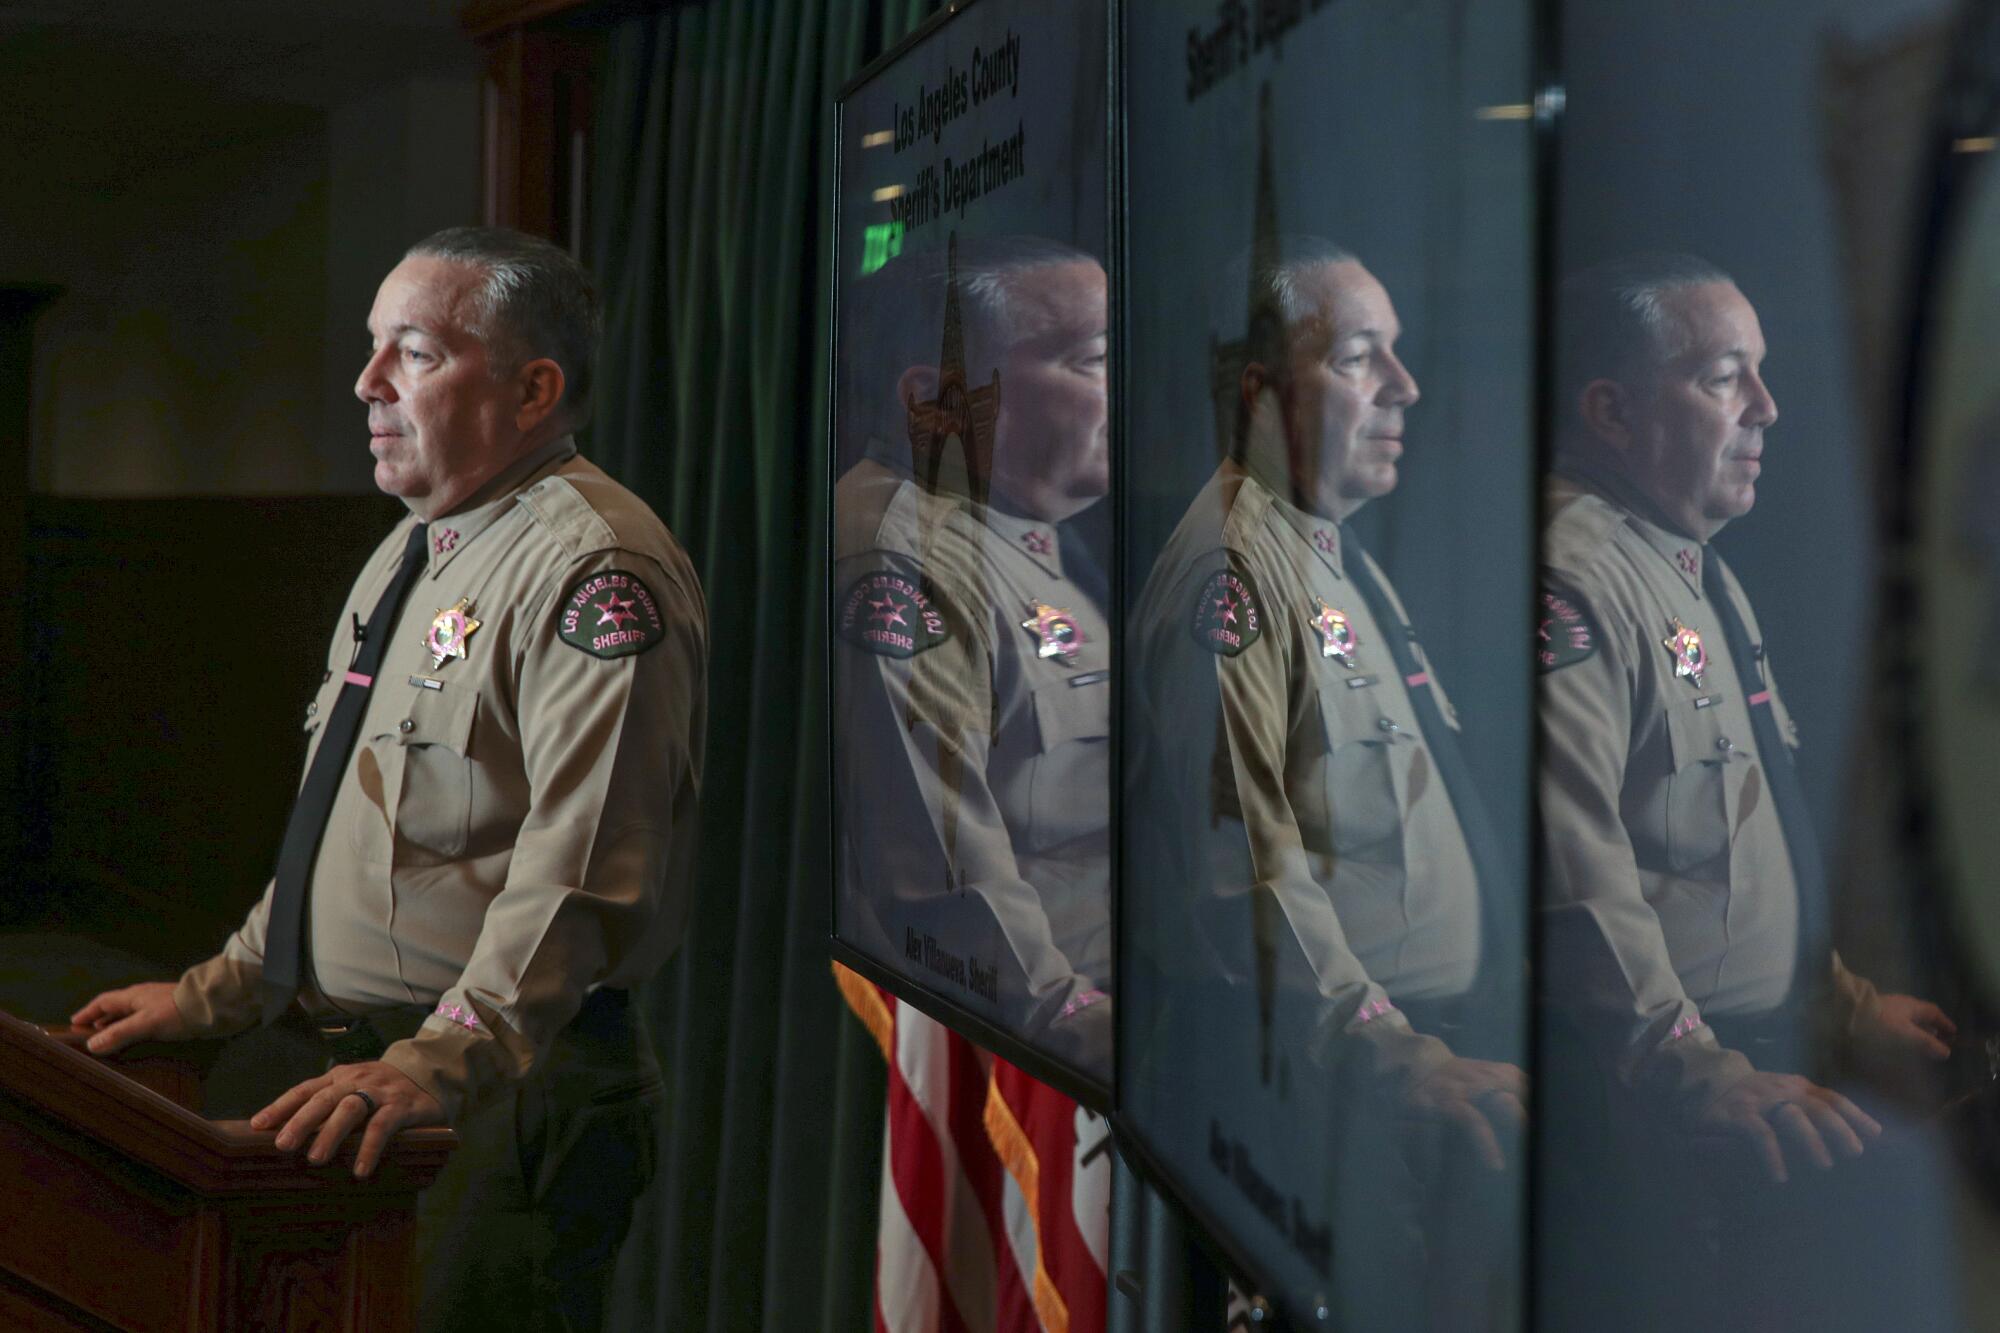 Sheriff Alex Villanueva is reflected on three monitors while speaking at a lectern